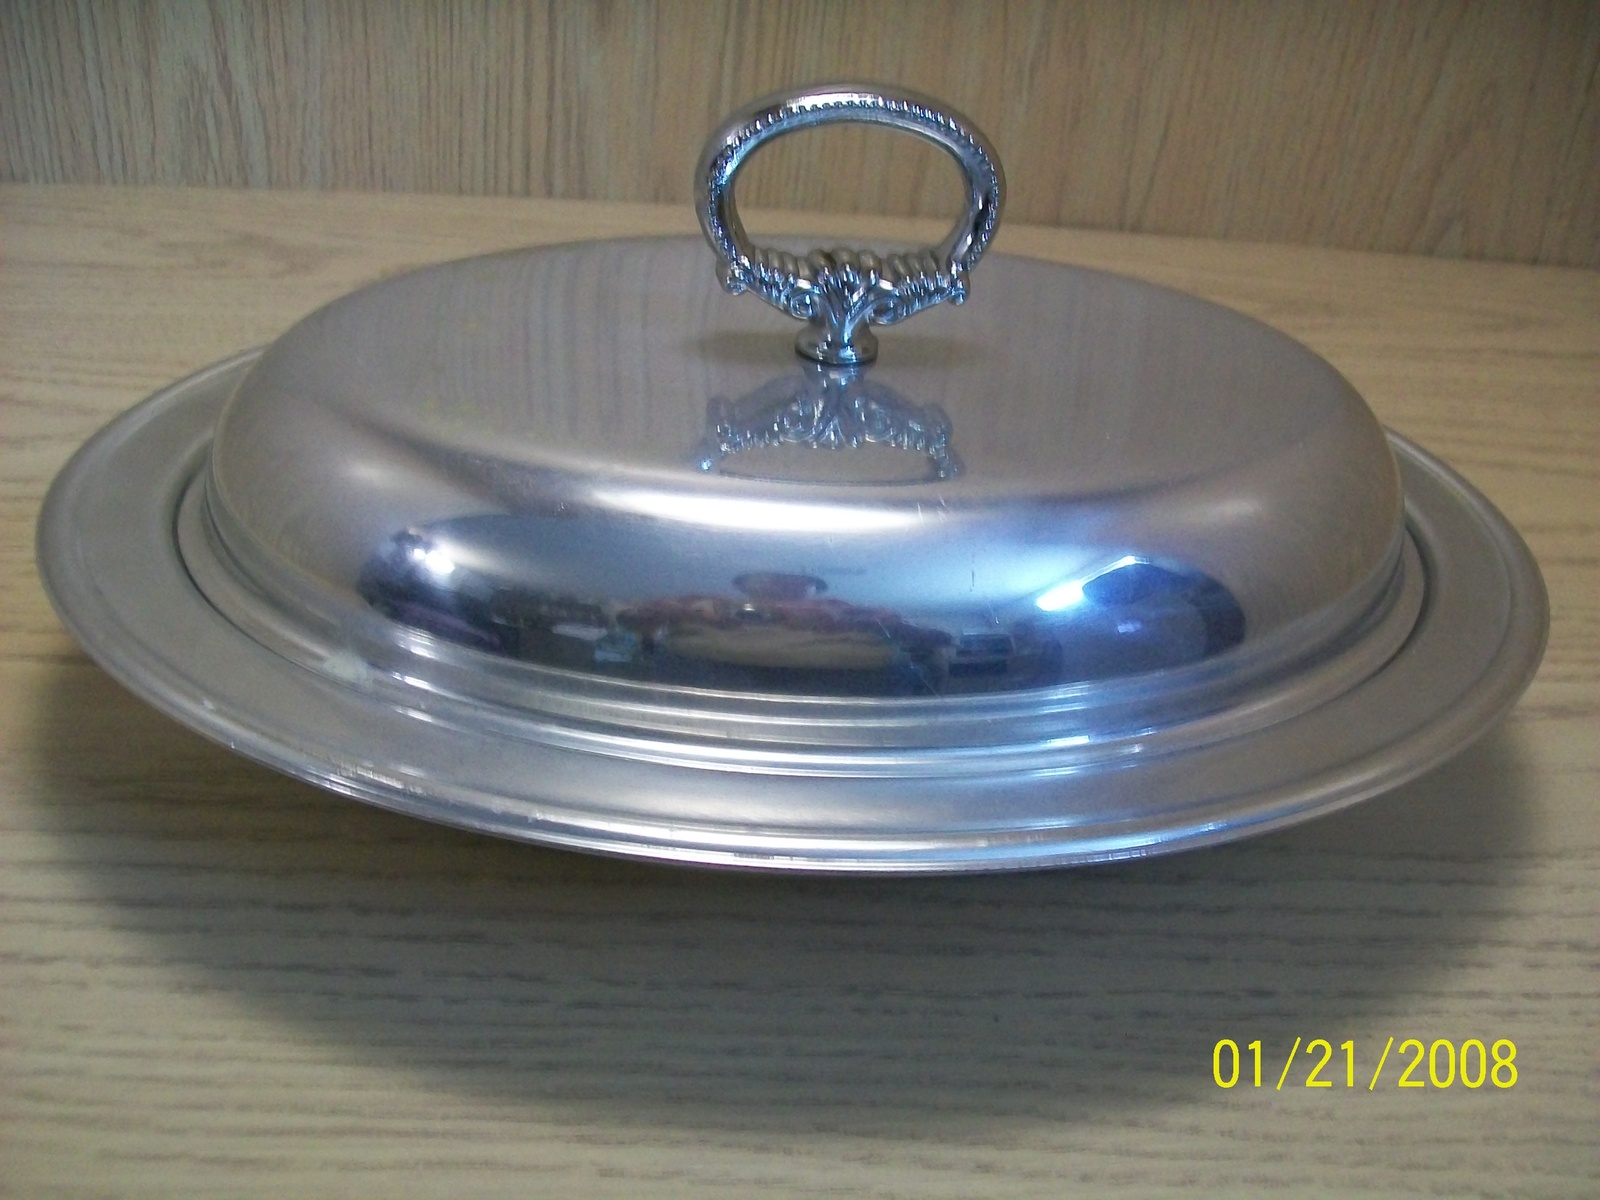 Primary image for Serving Dish Aluminum with Glass Insert Pfaltzgraff 